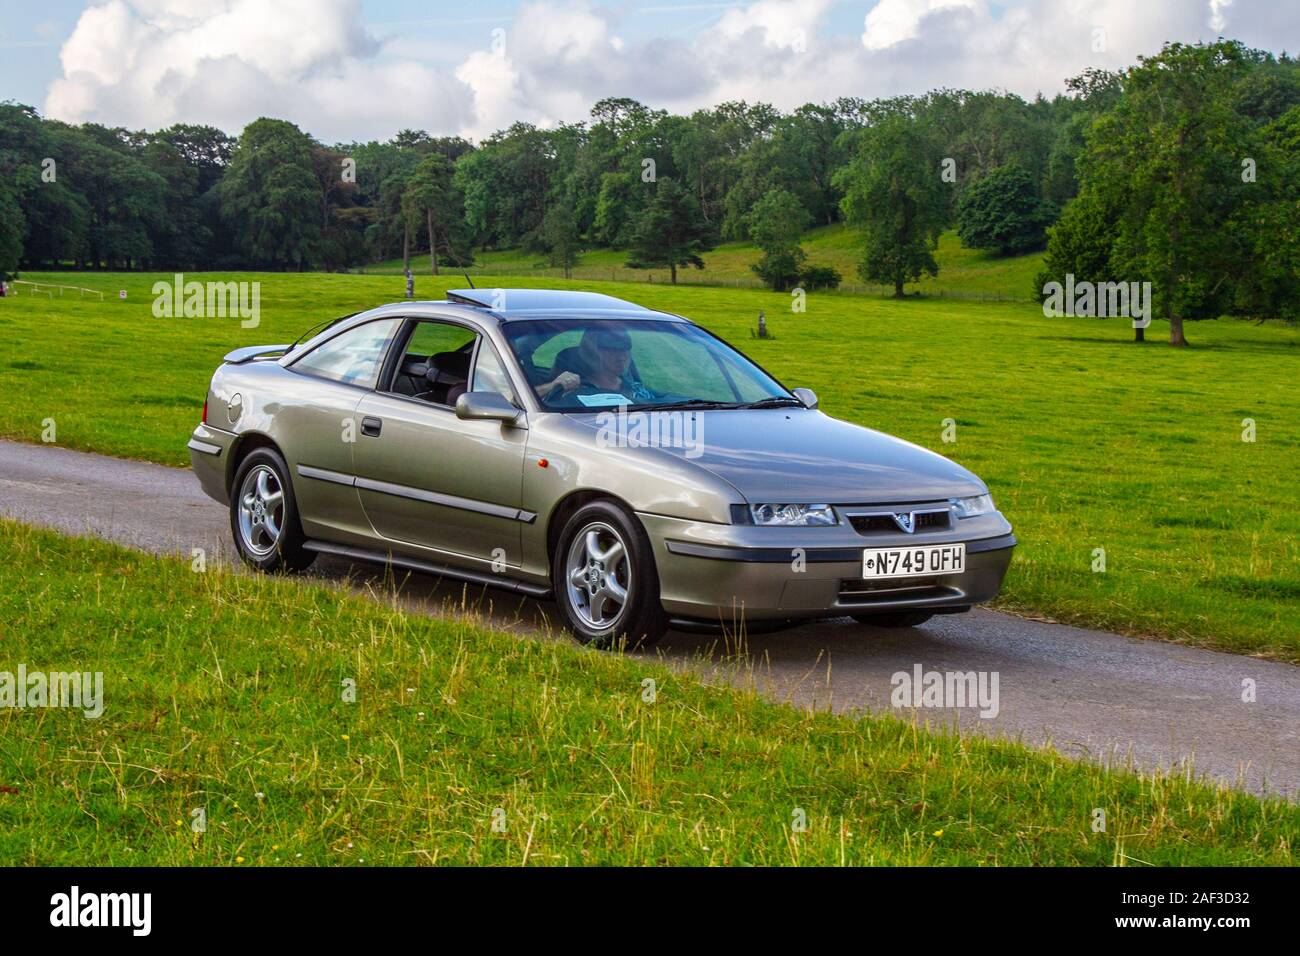 1996 90s silver Vauxhall Calibra V6; Classic cars, historics, cherished, old timers, collectable restored vintage veteran, vehicles of yesteryear arriving for the Mark Woodward historical motoring event at Leighton Hall, Carnforth, UK Stock Photo